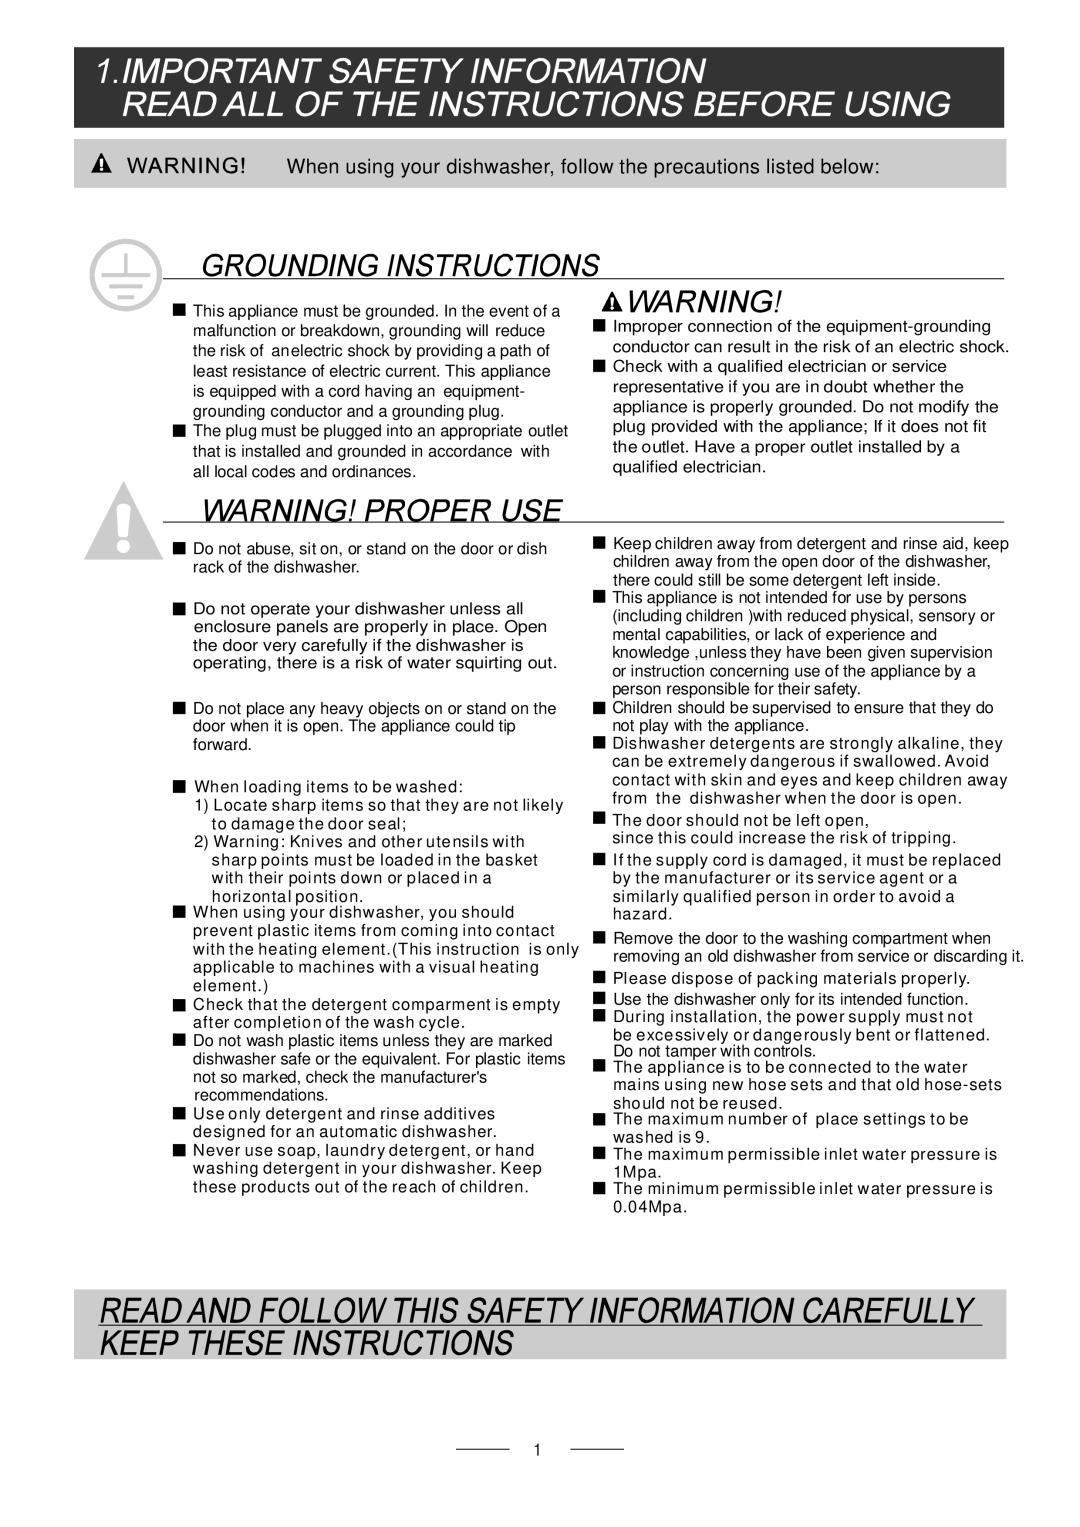 Whirlpool ADG 175 manual When using your dishwasher, follow the precautions listed below 